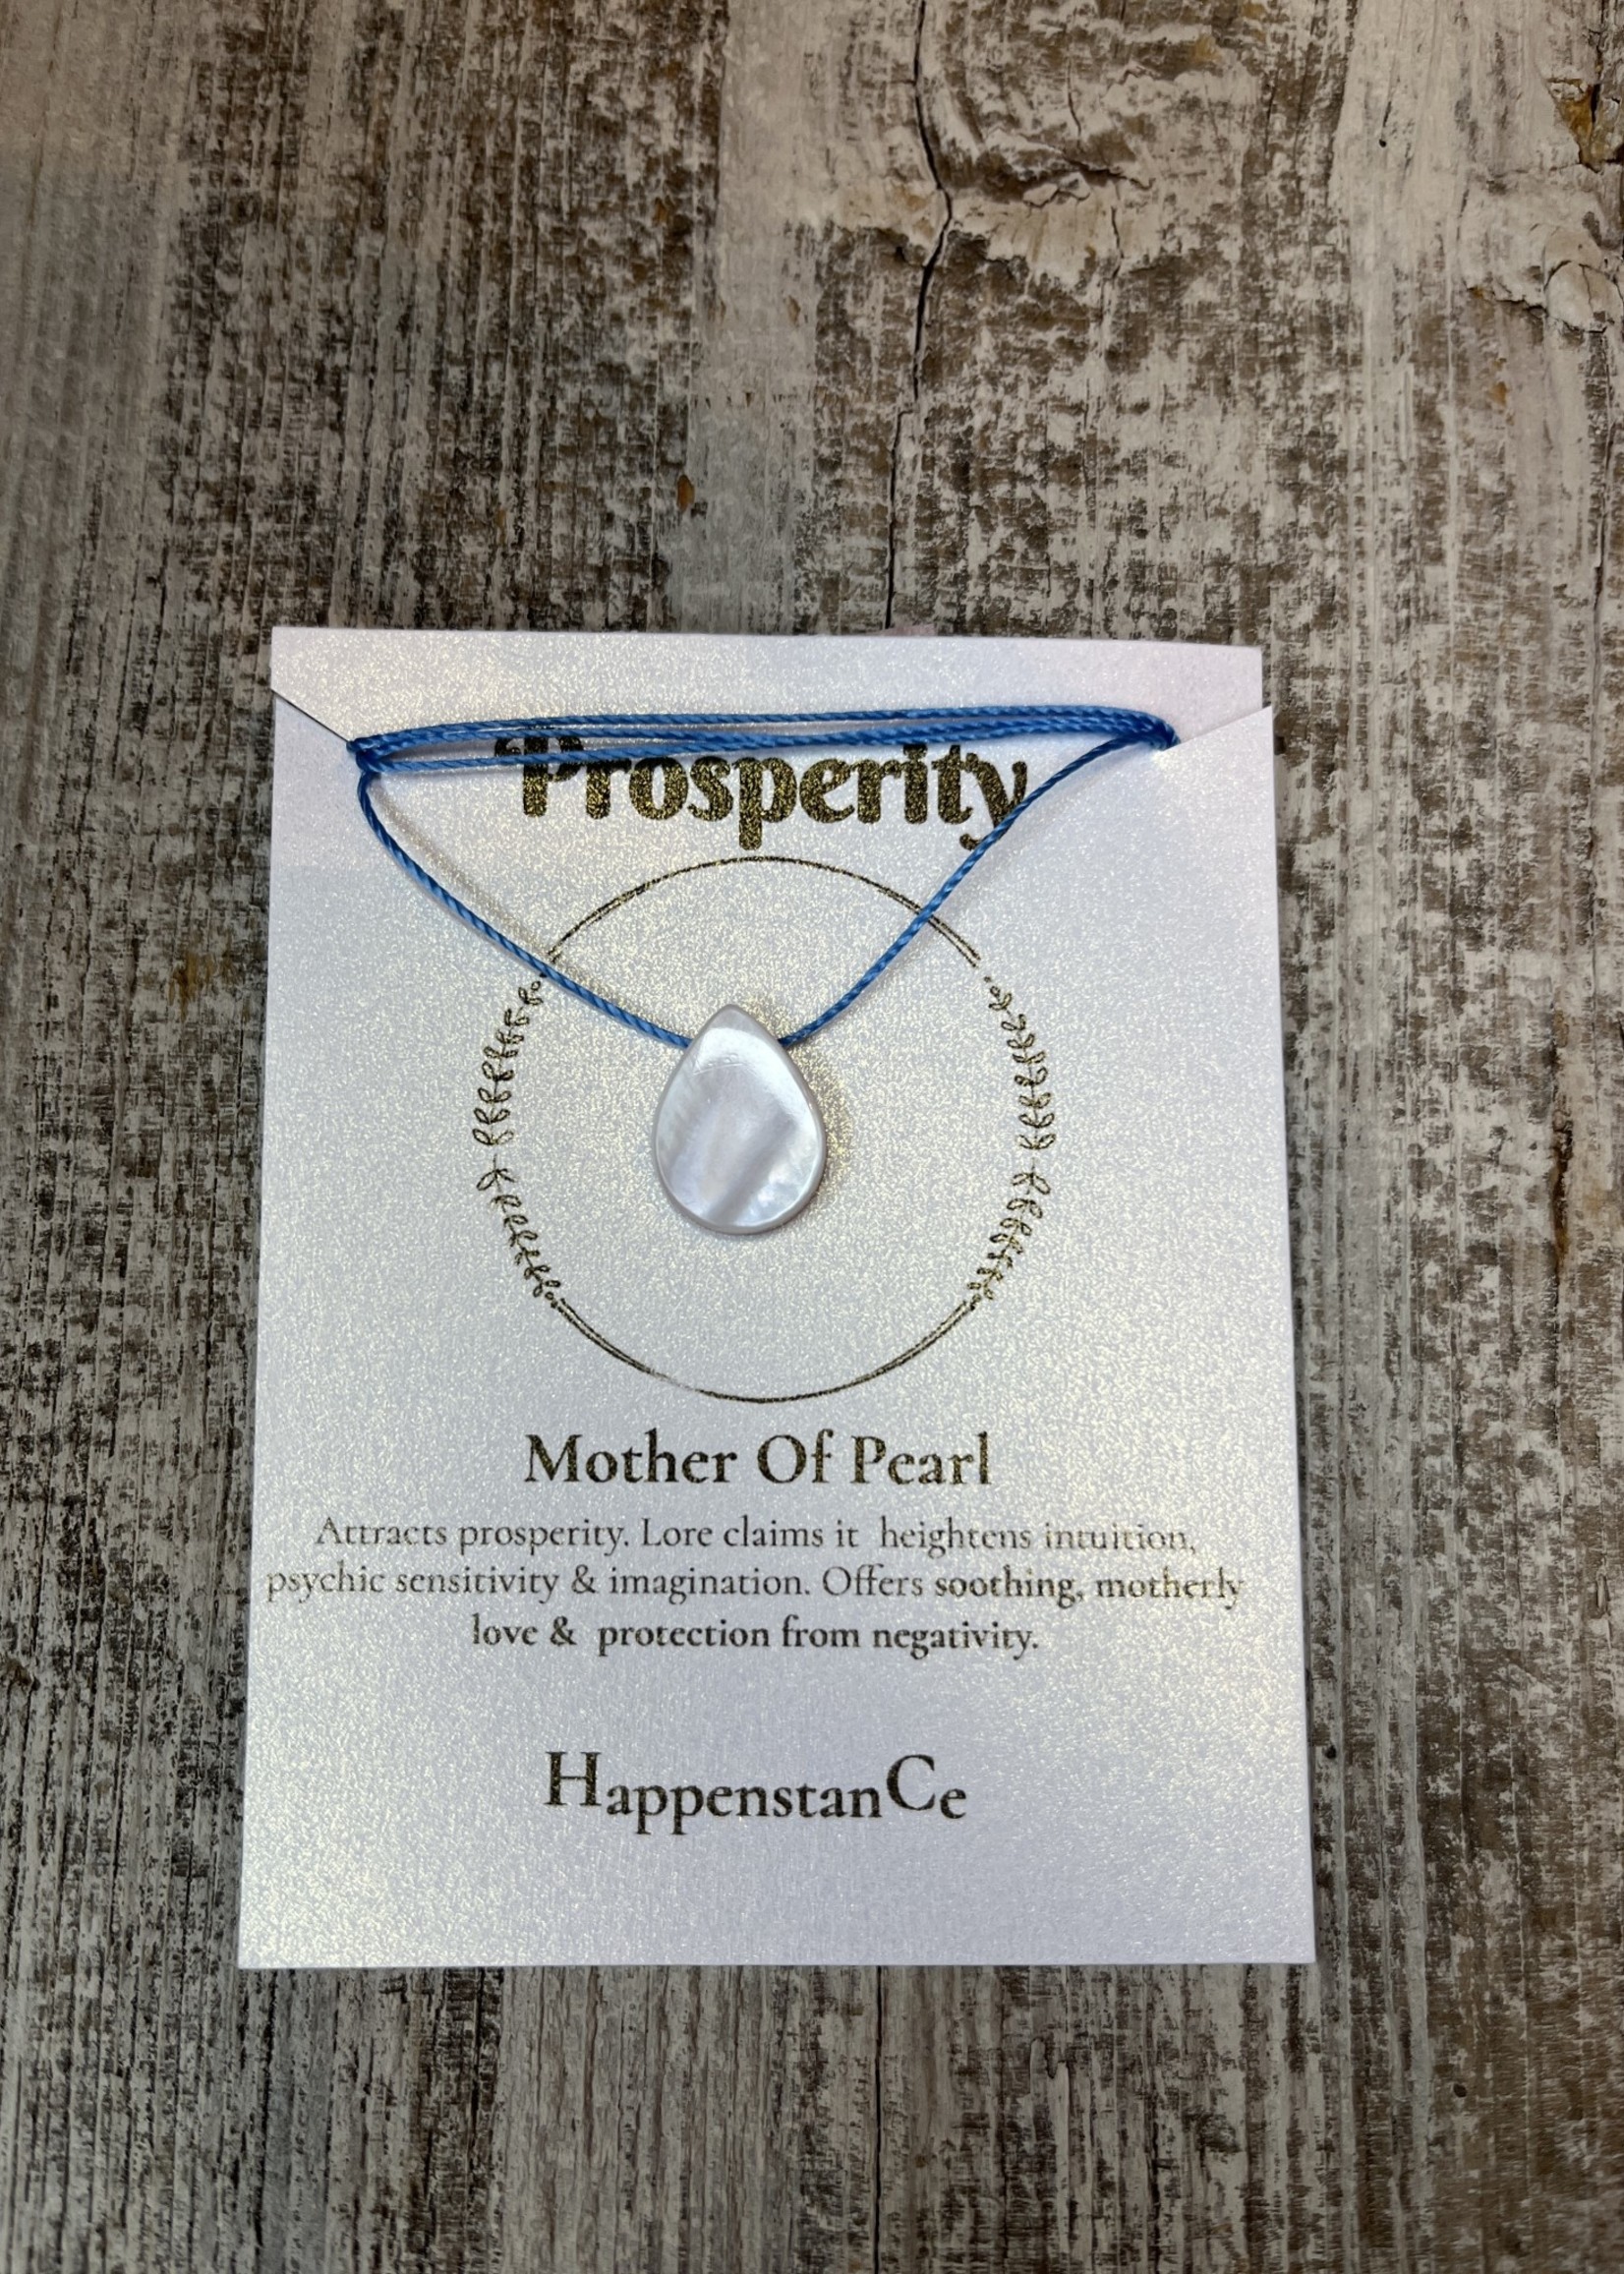 HappenstanCe Prosperity Mother of Pearl Necklace